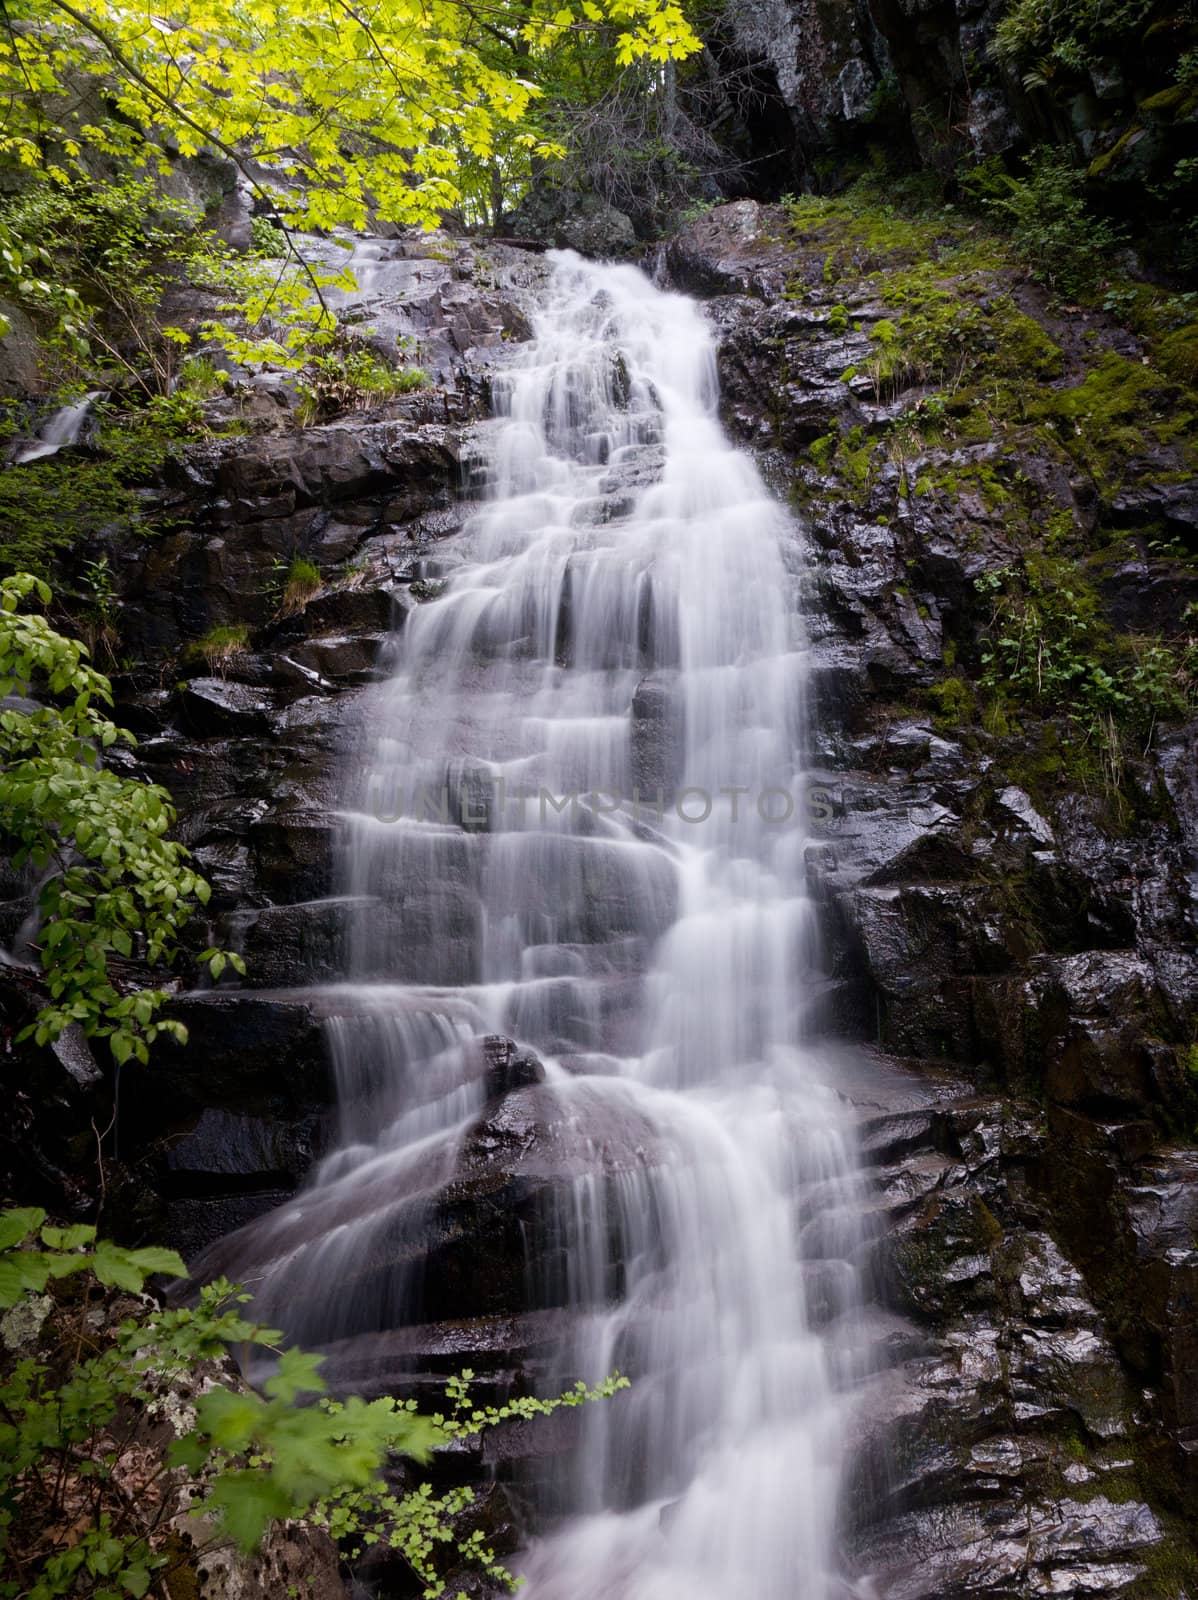 Overall Run waterfall is the highest waterfall in Virginia if its sections are taken into account.